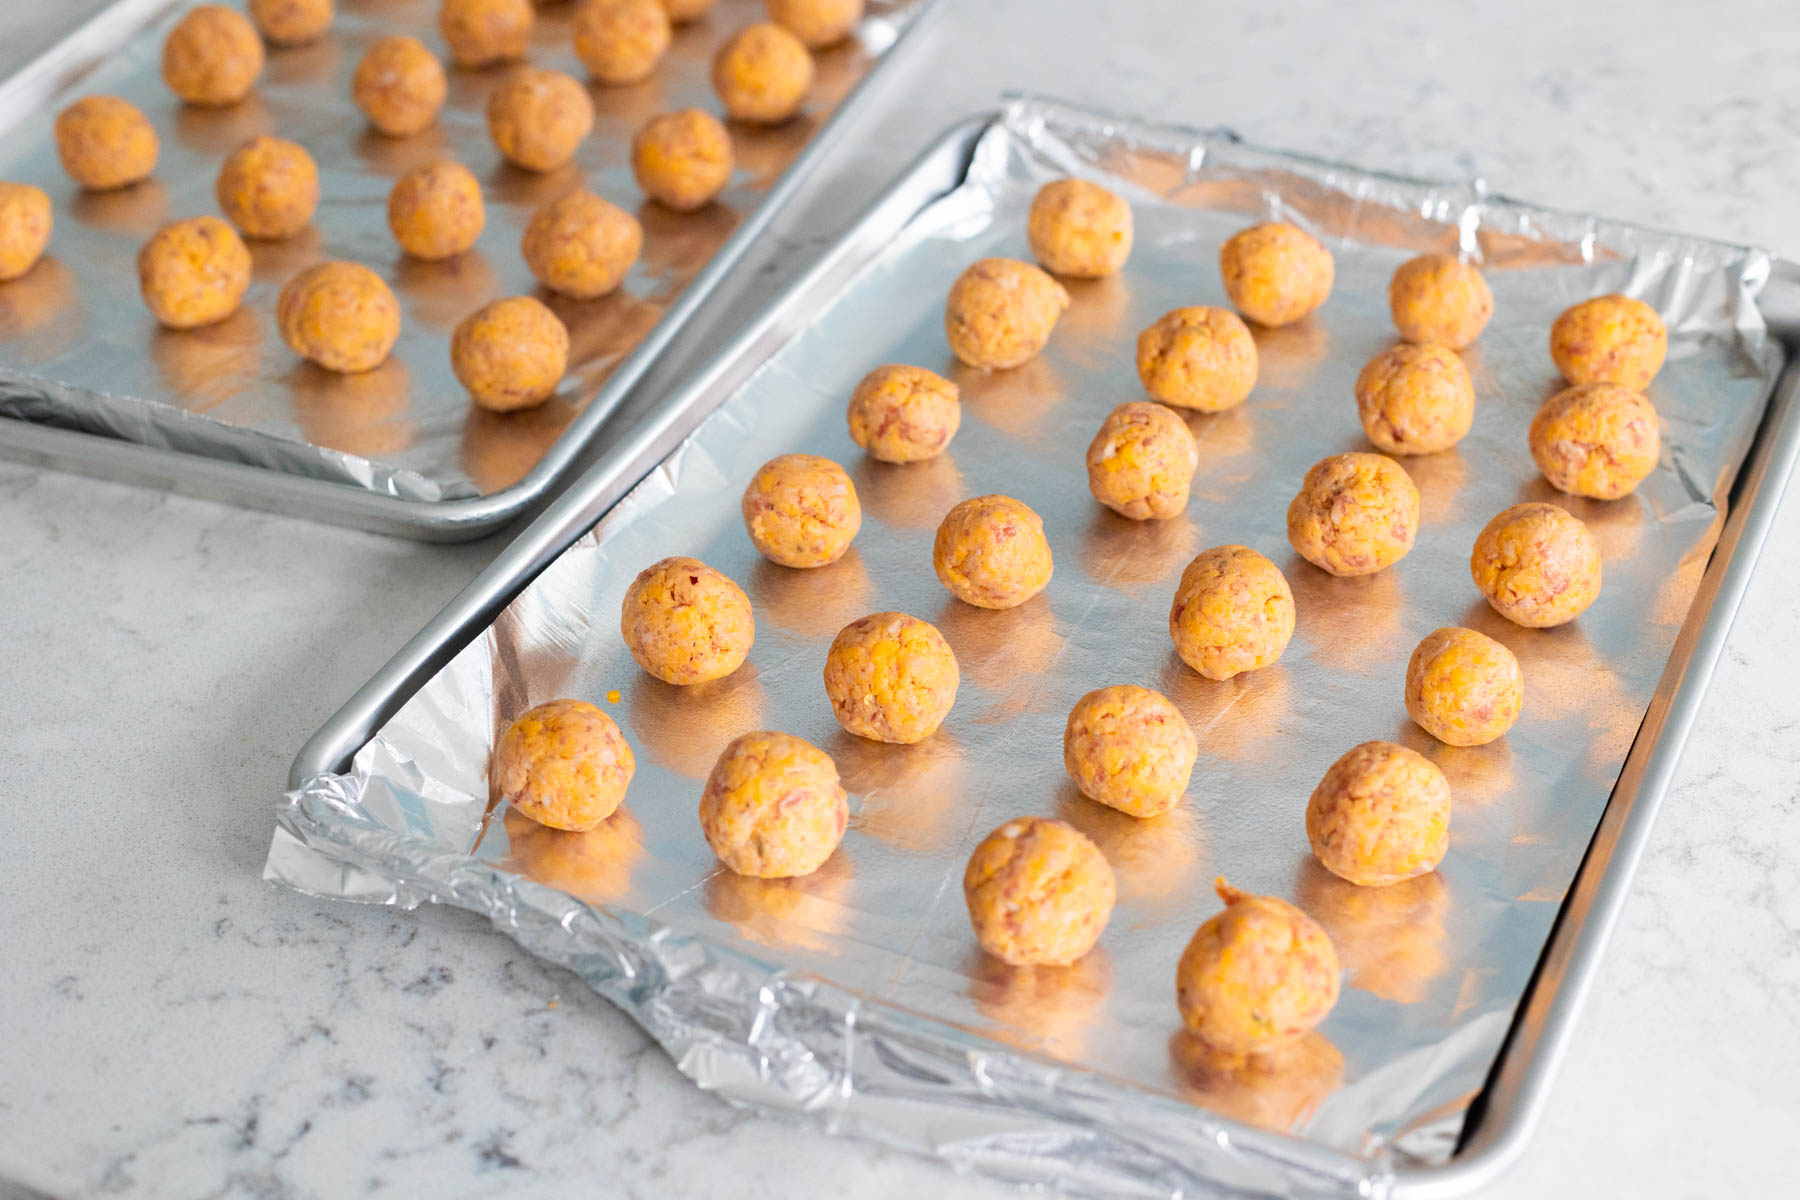 The baking pans have been lined with aluminum foil and the sausage balls are lined up in neat rows.